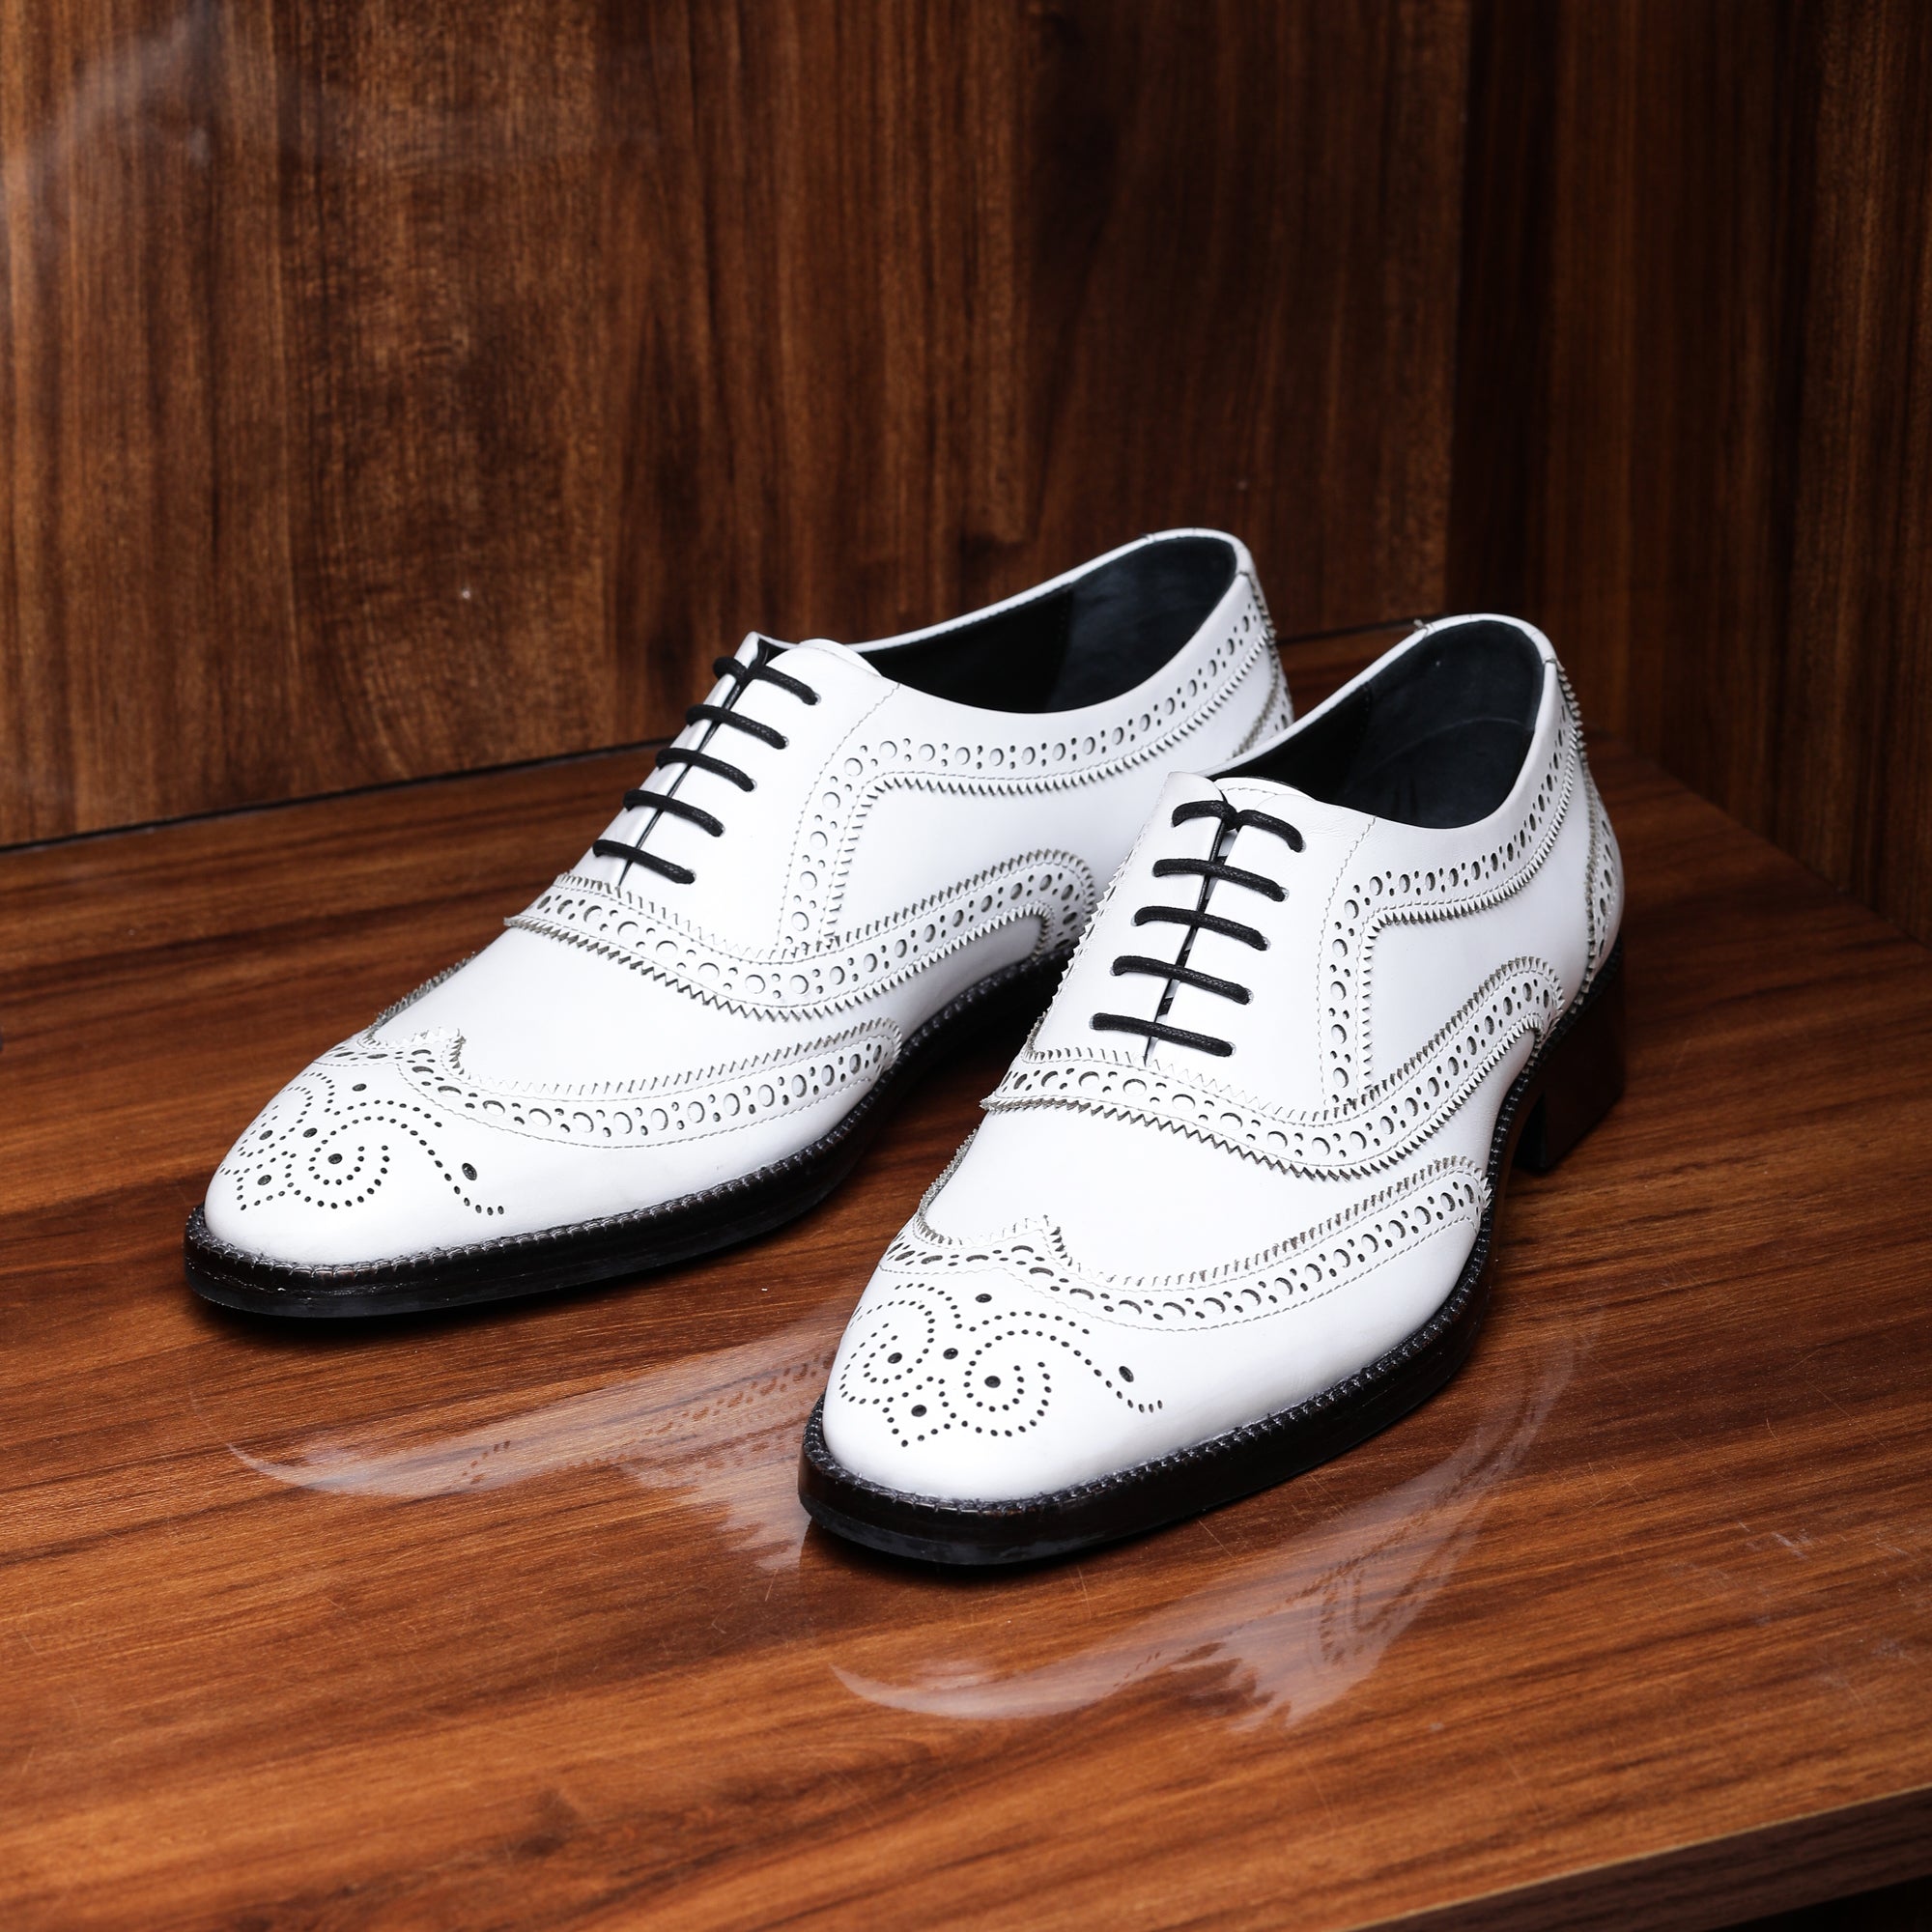 Wingtip Brogue Oxford- White, Wingtip Shoes